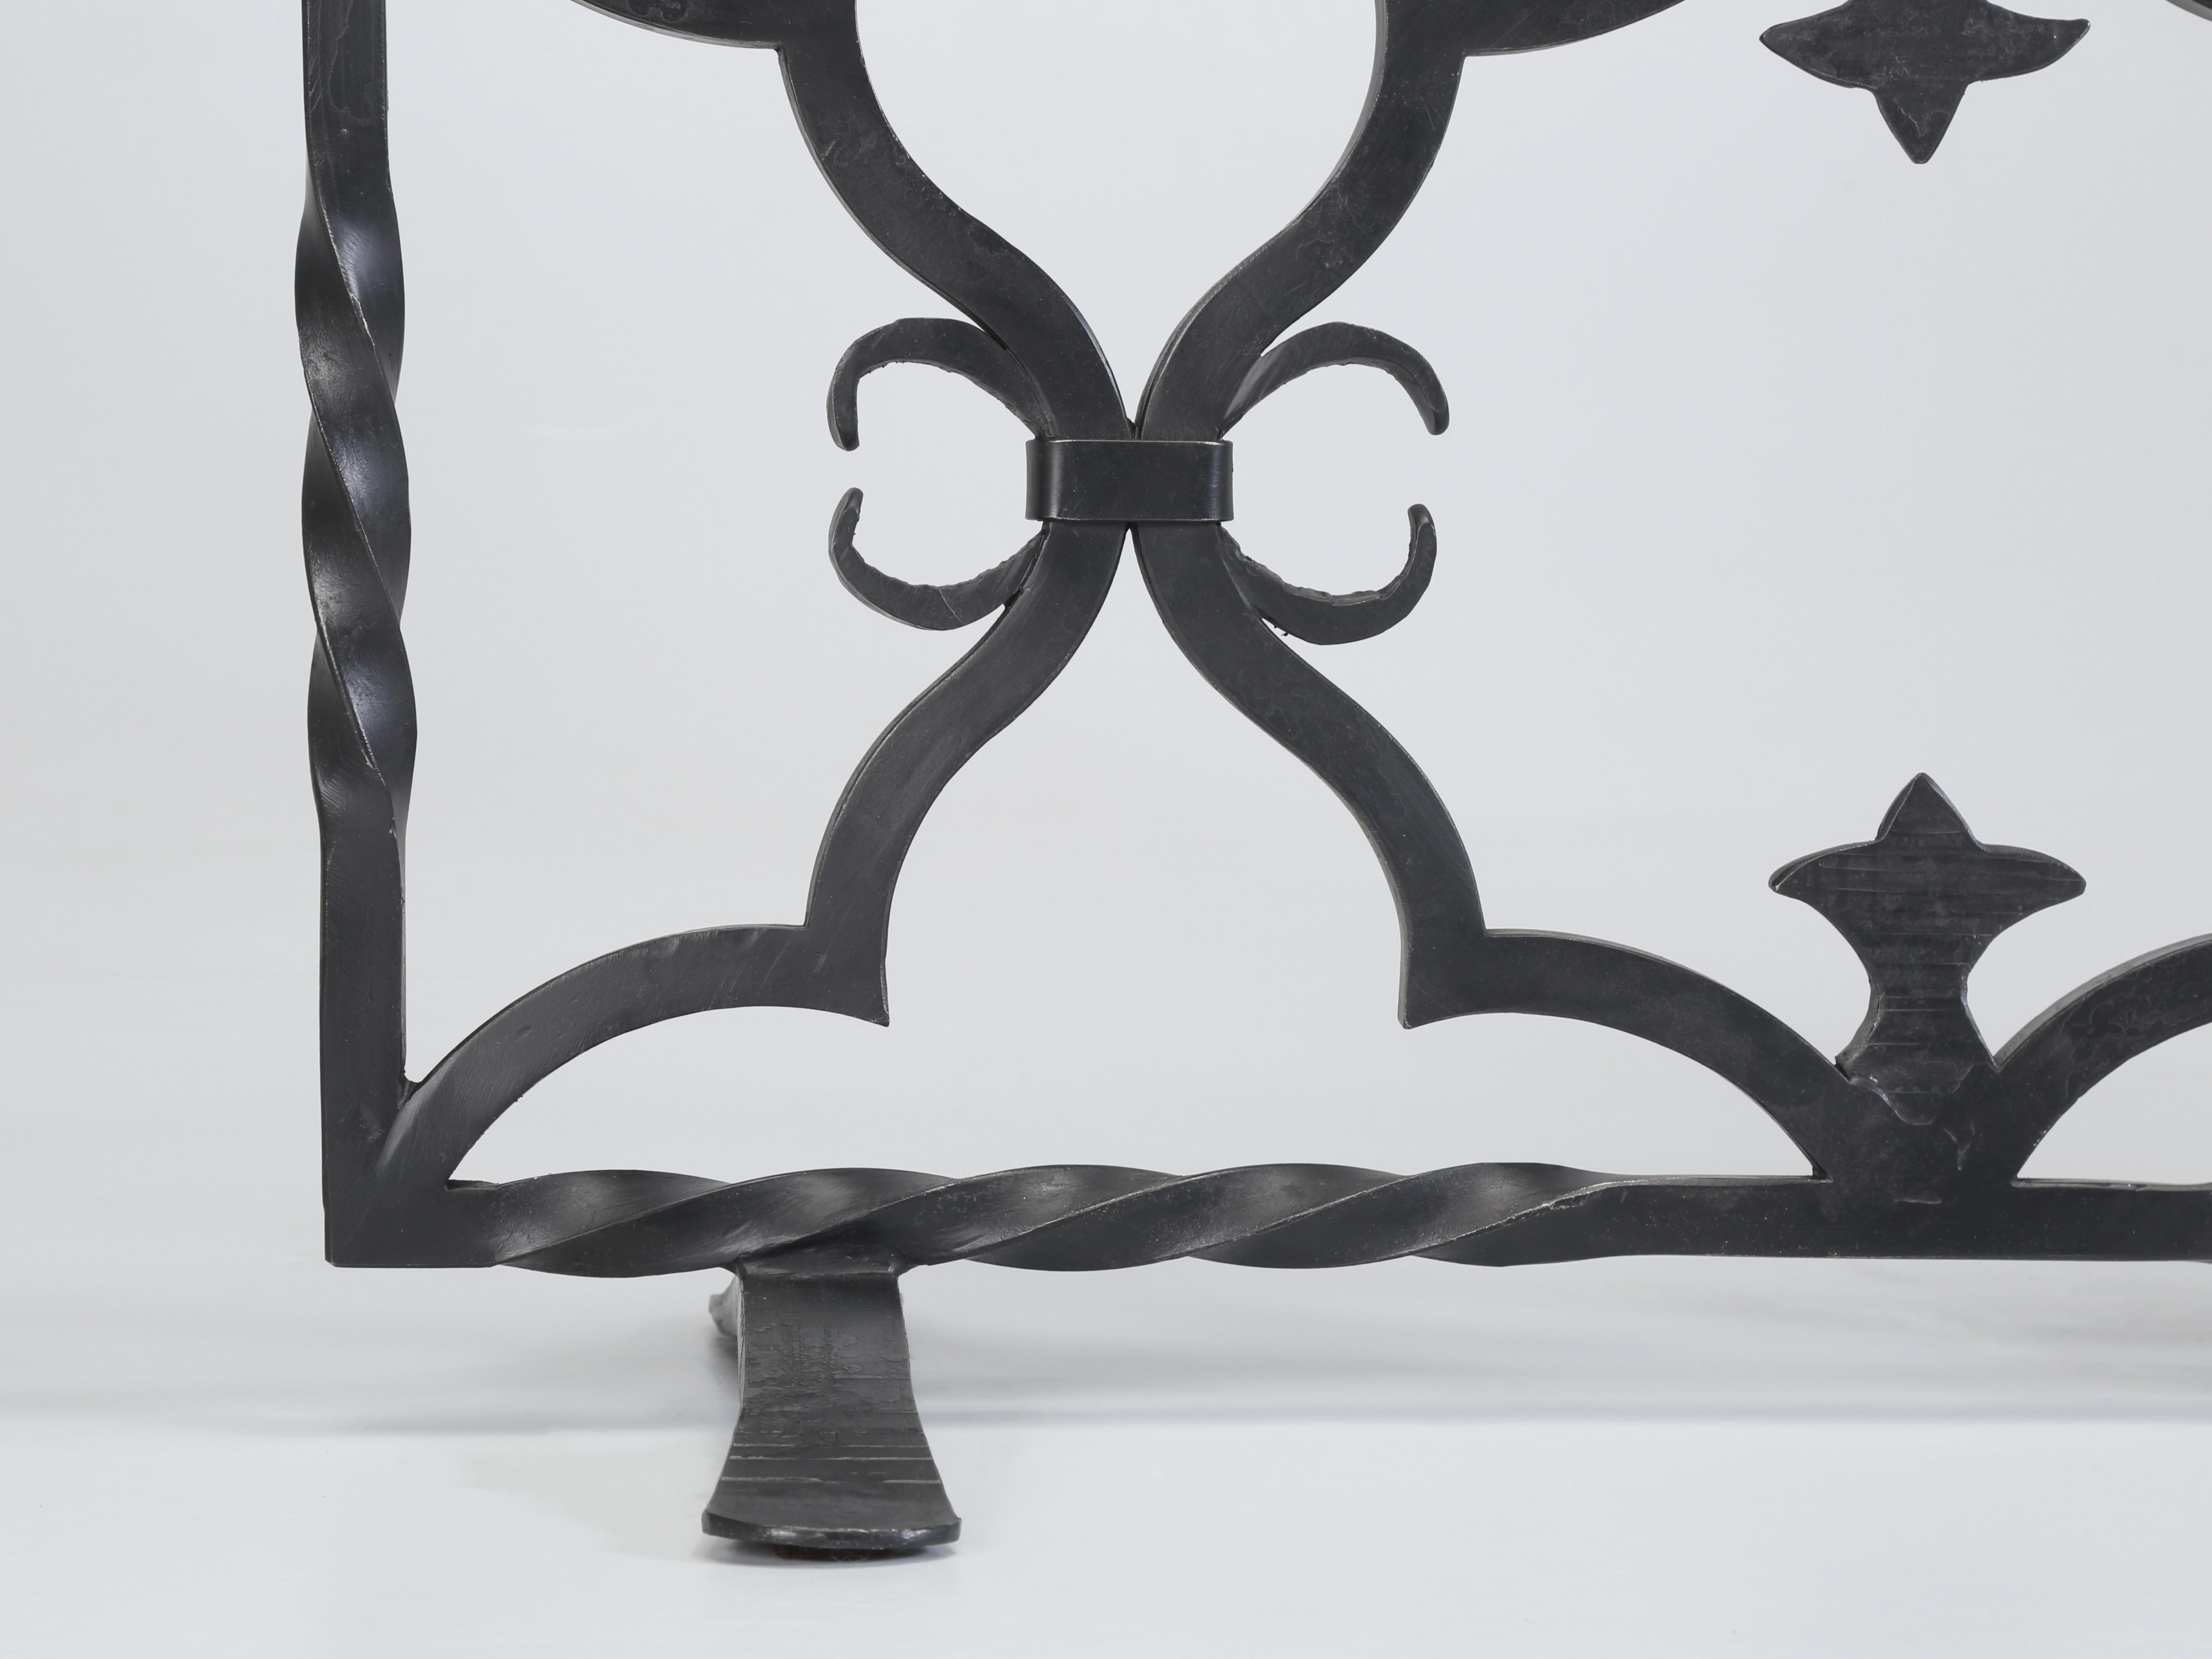 Hand-Wrought Iron Made to Order Old Plank Fireplace Screen Mediterranean Style For Sale 3